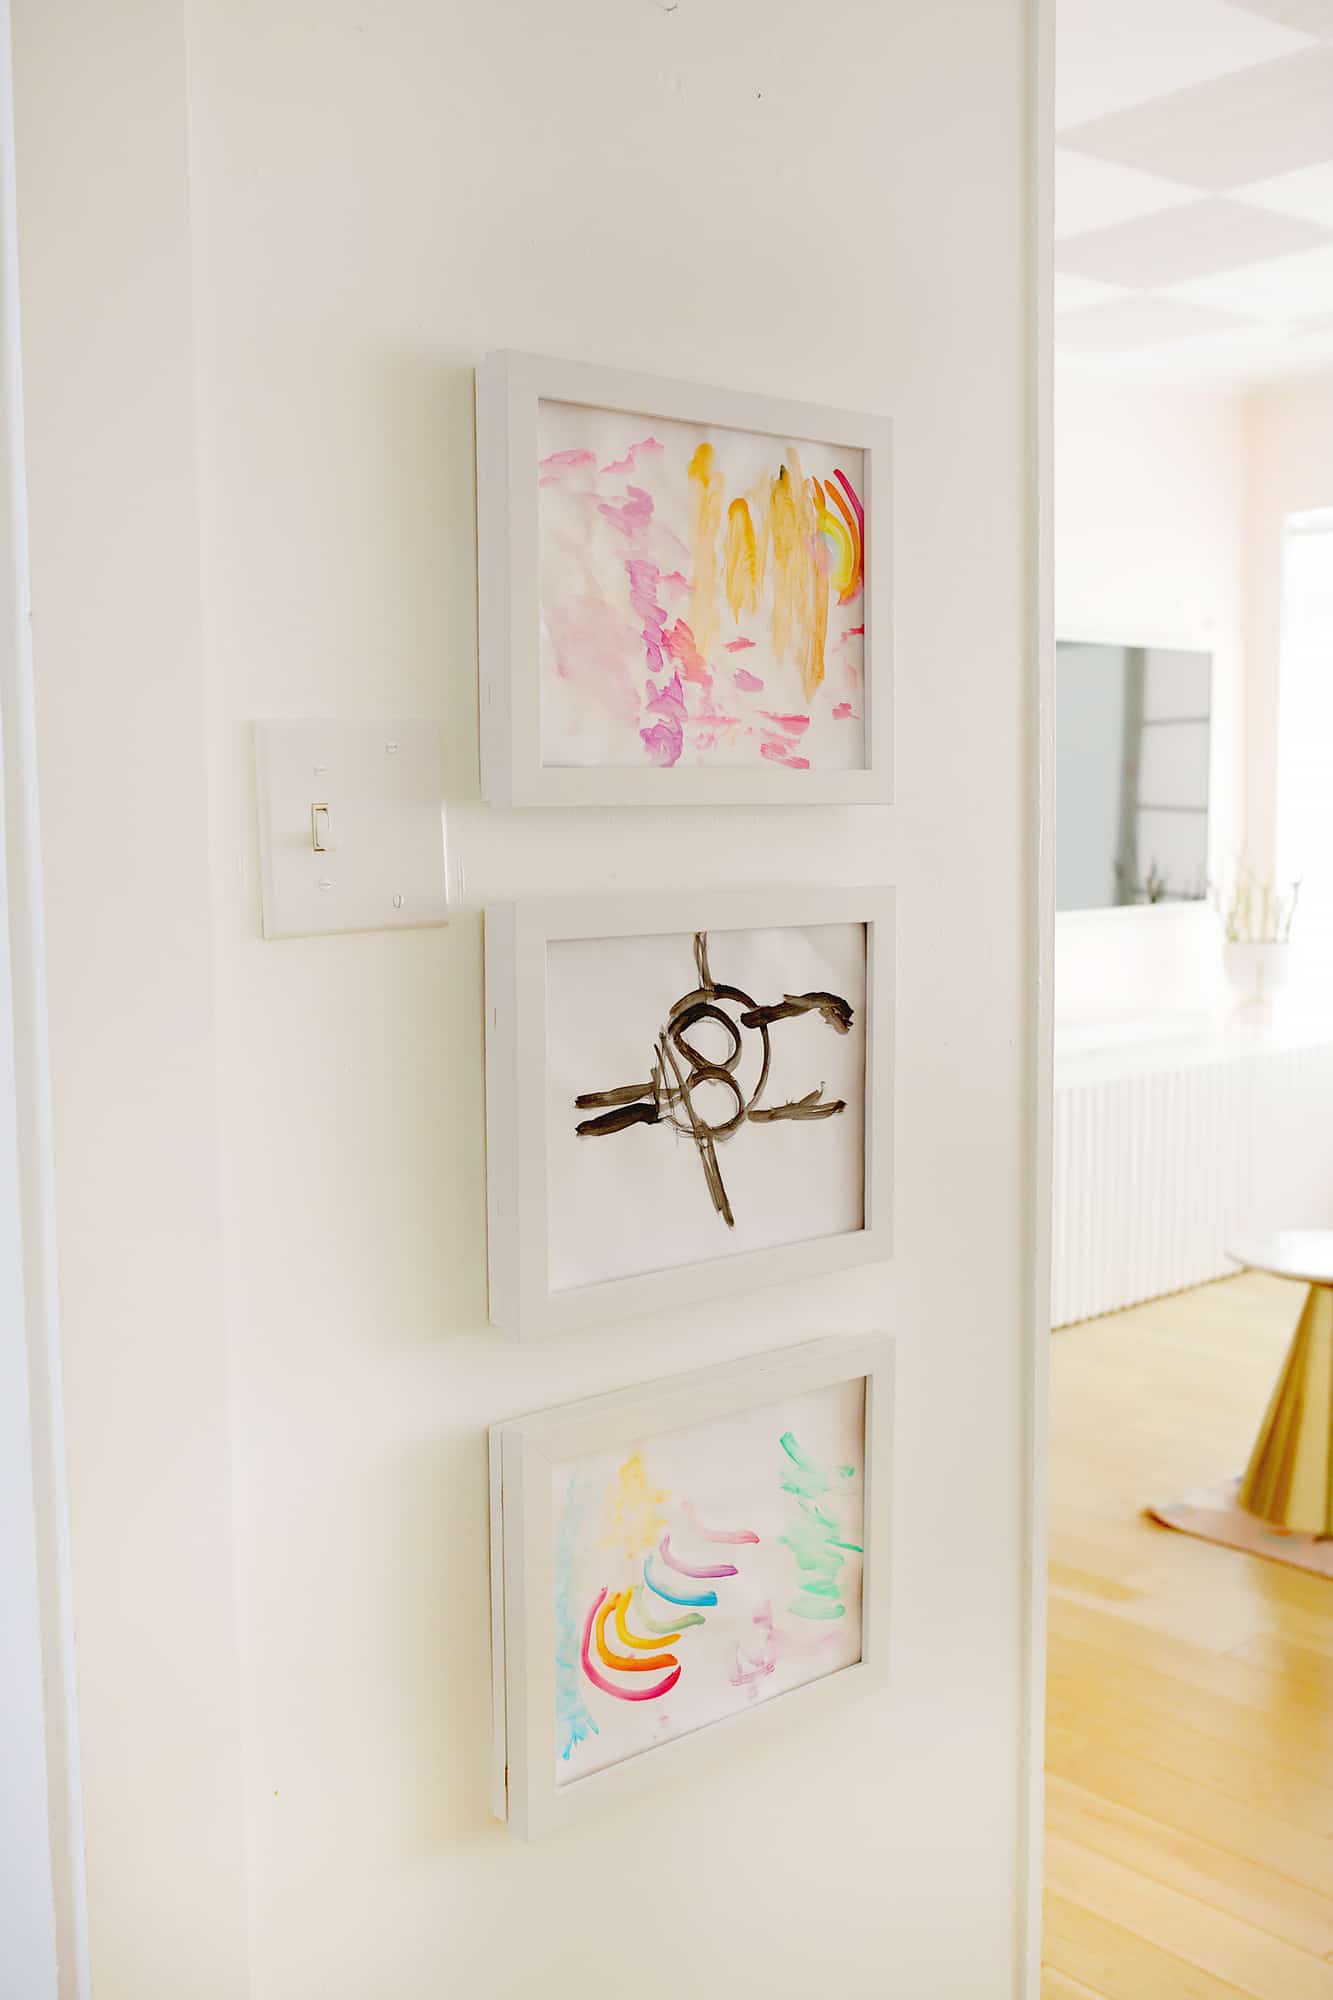 Kid's art display frames hanging on wall with kid's art inside frames